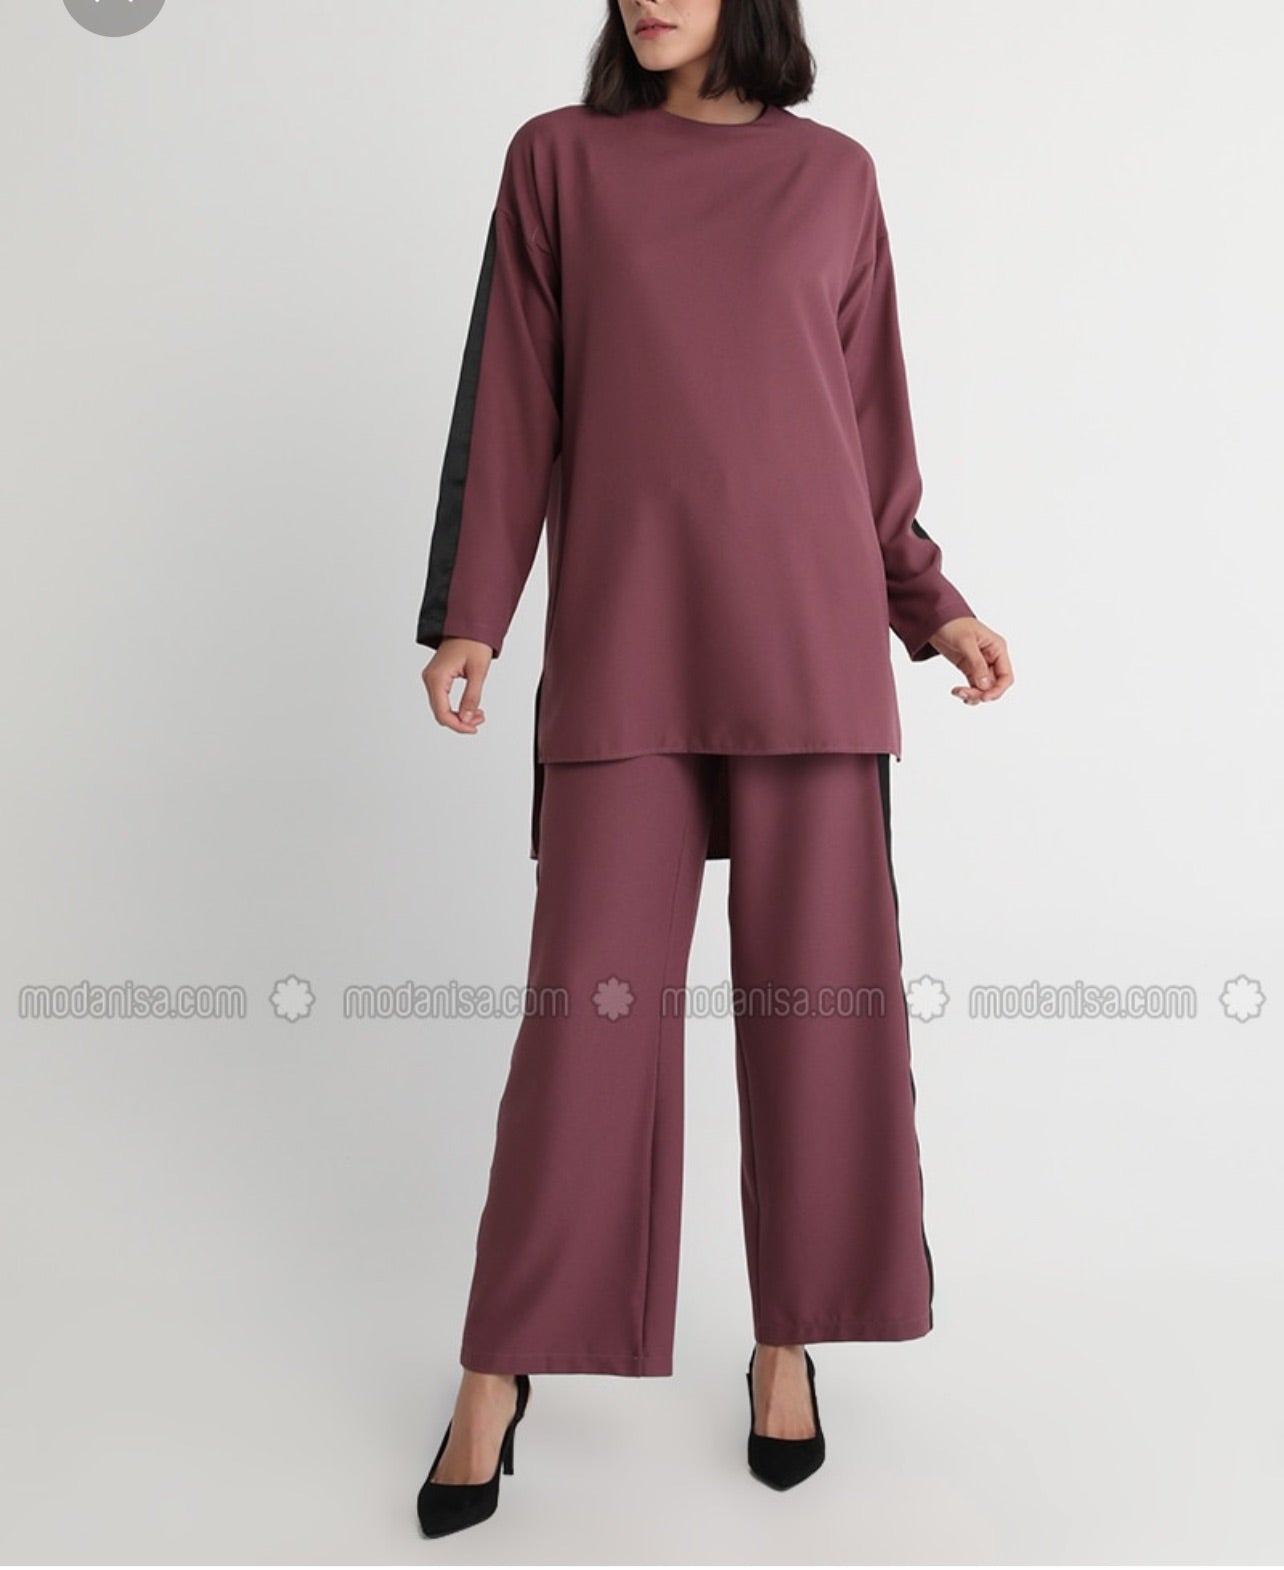 Wide leg pants with Long top without belt